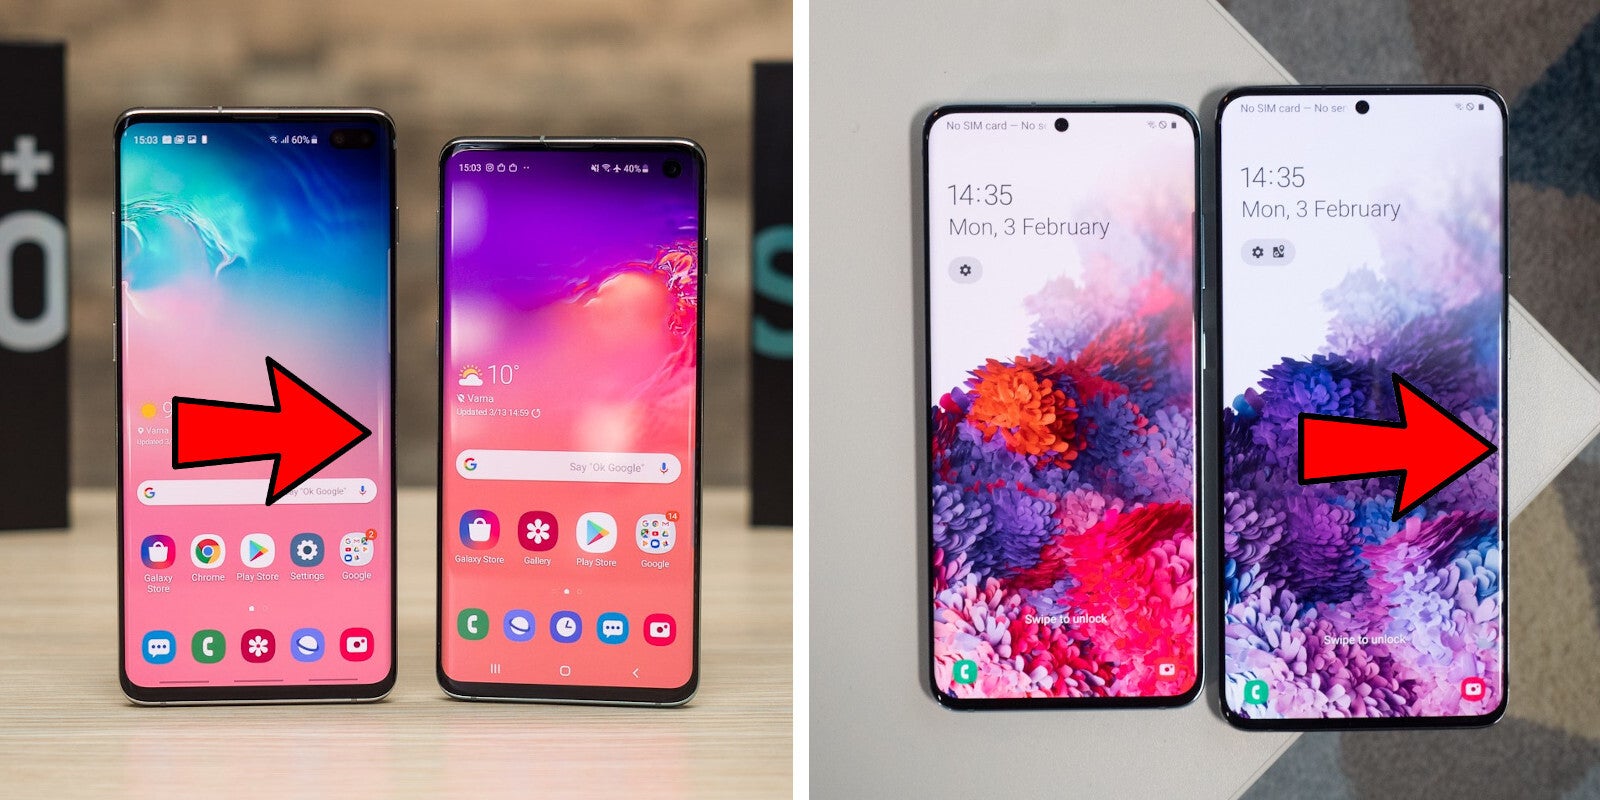 Reflections along the edges on the Galaxy S10 vs the Galaxy S20, still some reflection but not nearly as intrusive - With the Galaxy S20 series, Samsung finally nailed this one feature